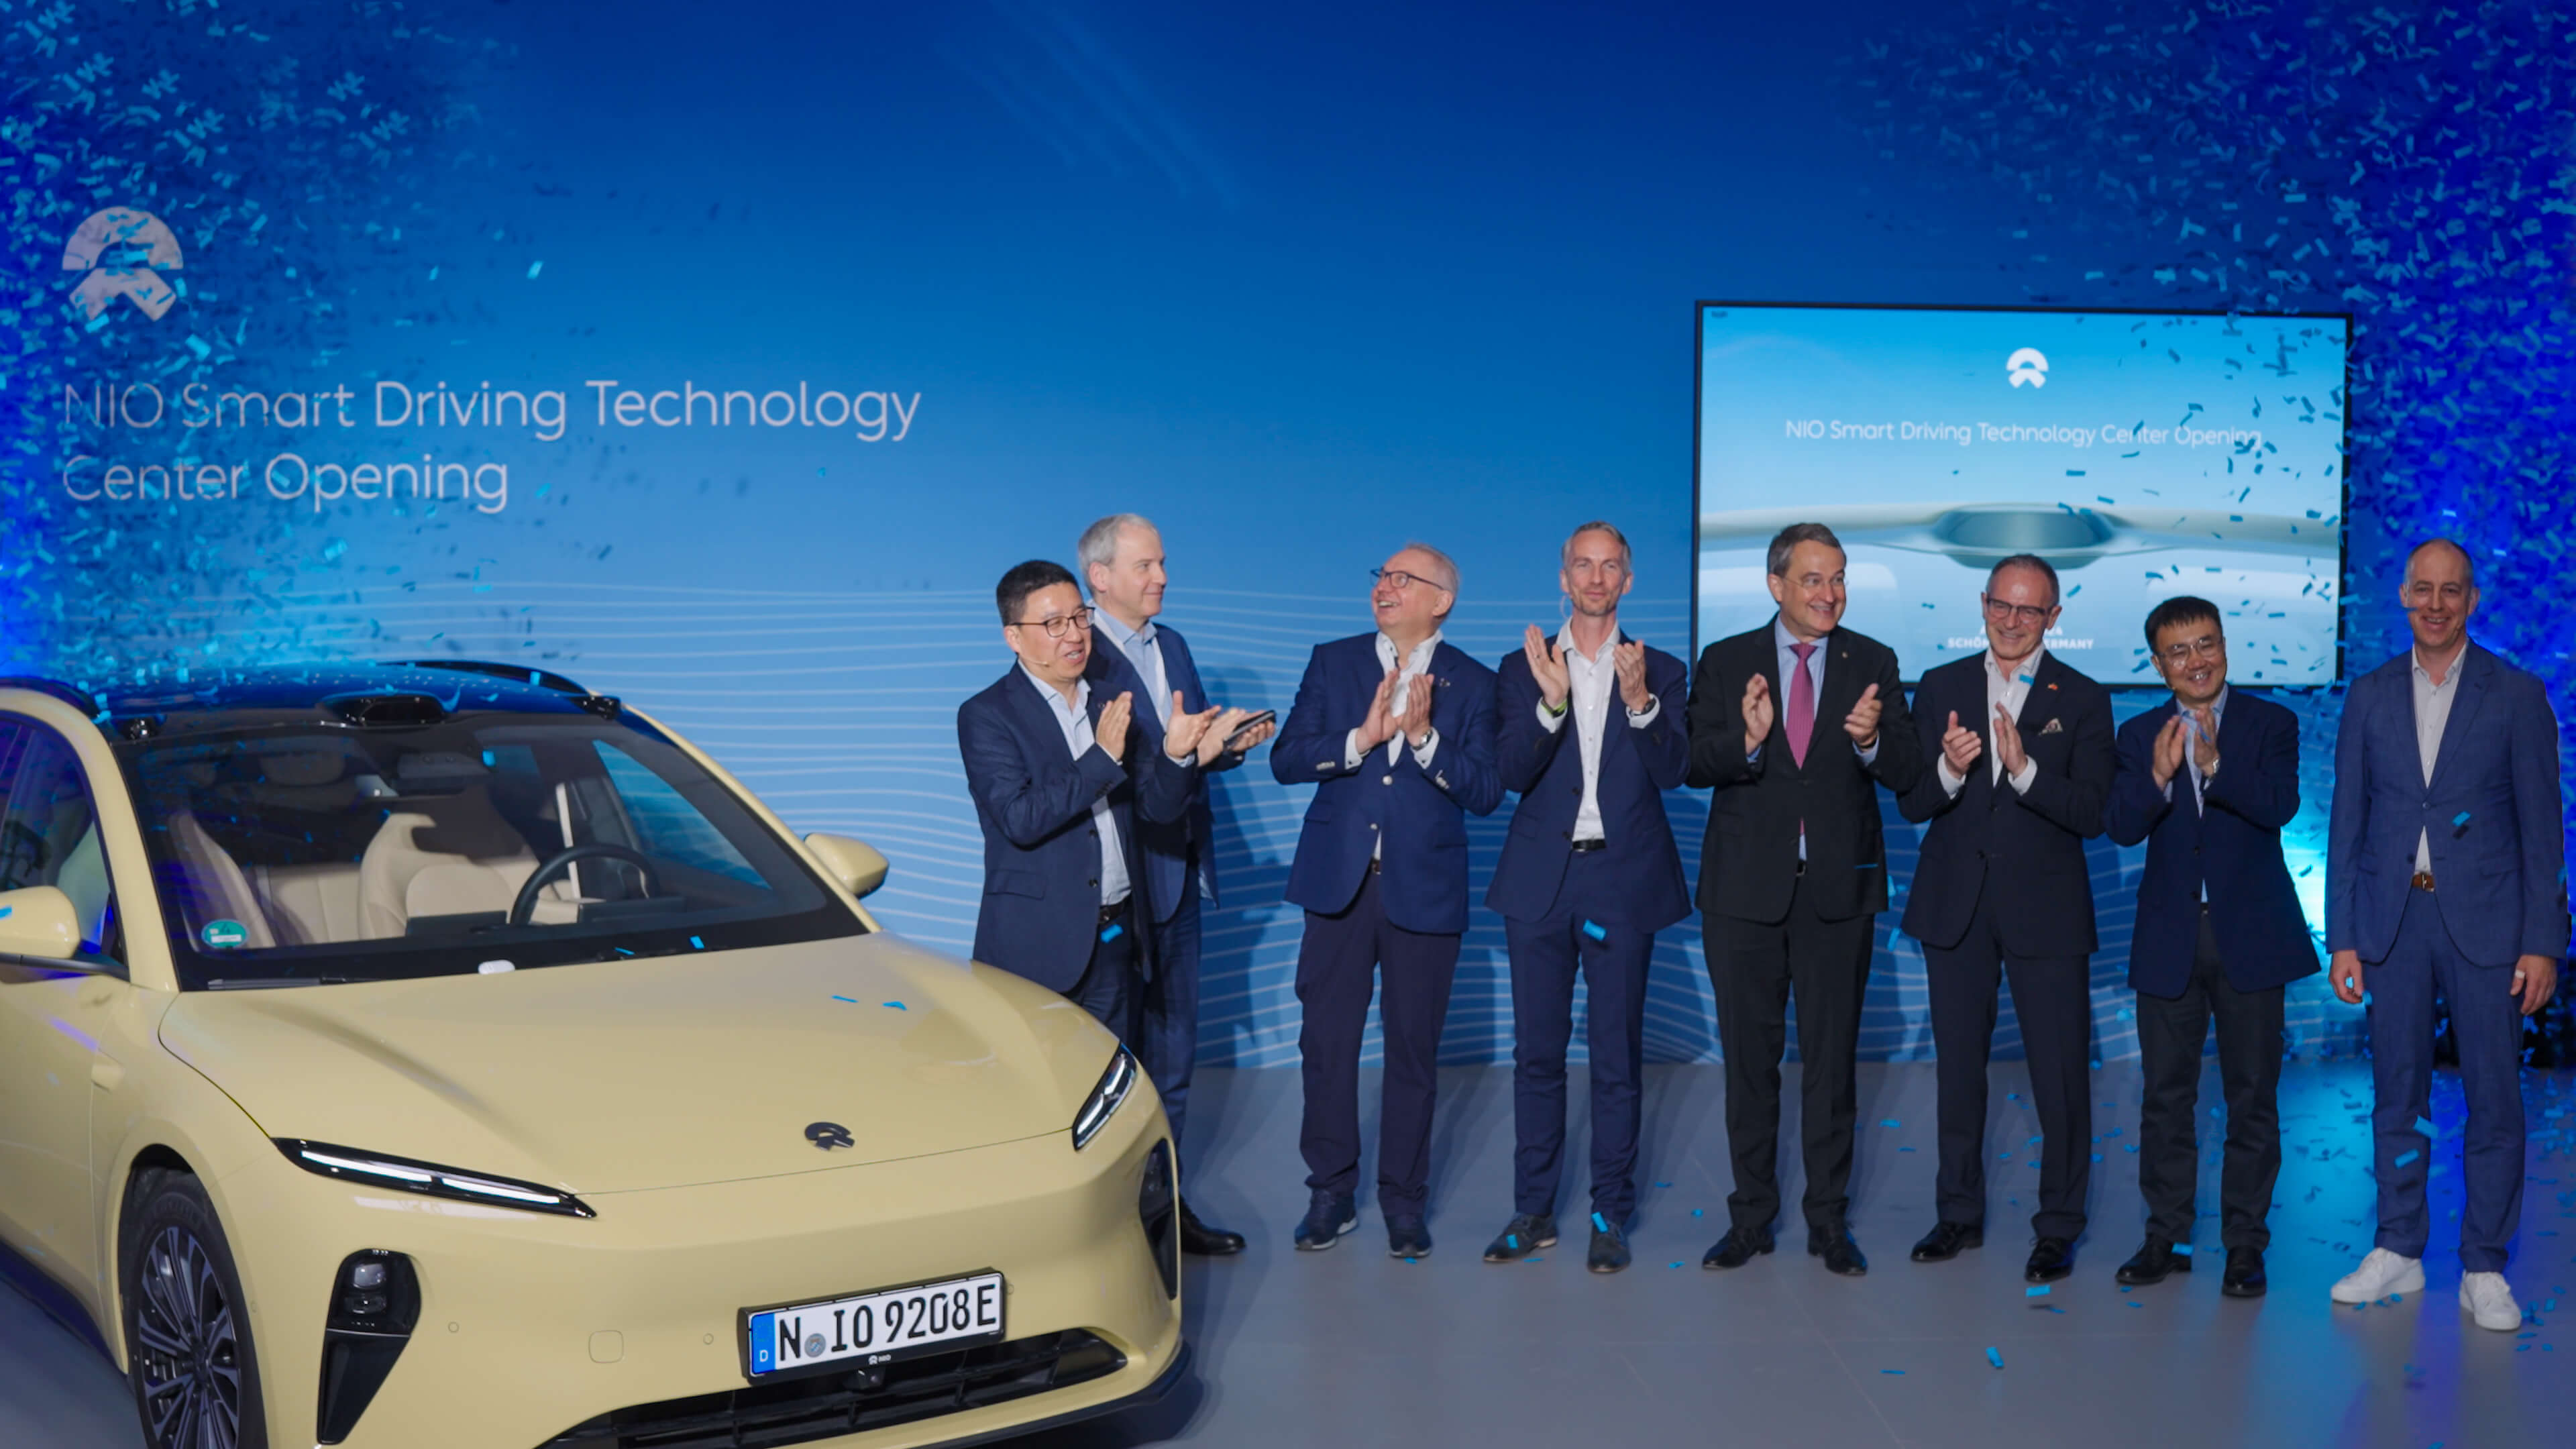 NIO expands its international footprint and sets new standards in driving safety and comfort with new European Smart Driving Technology Center